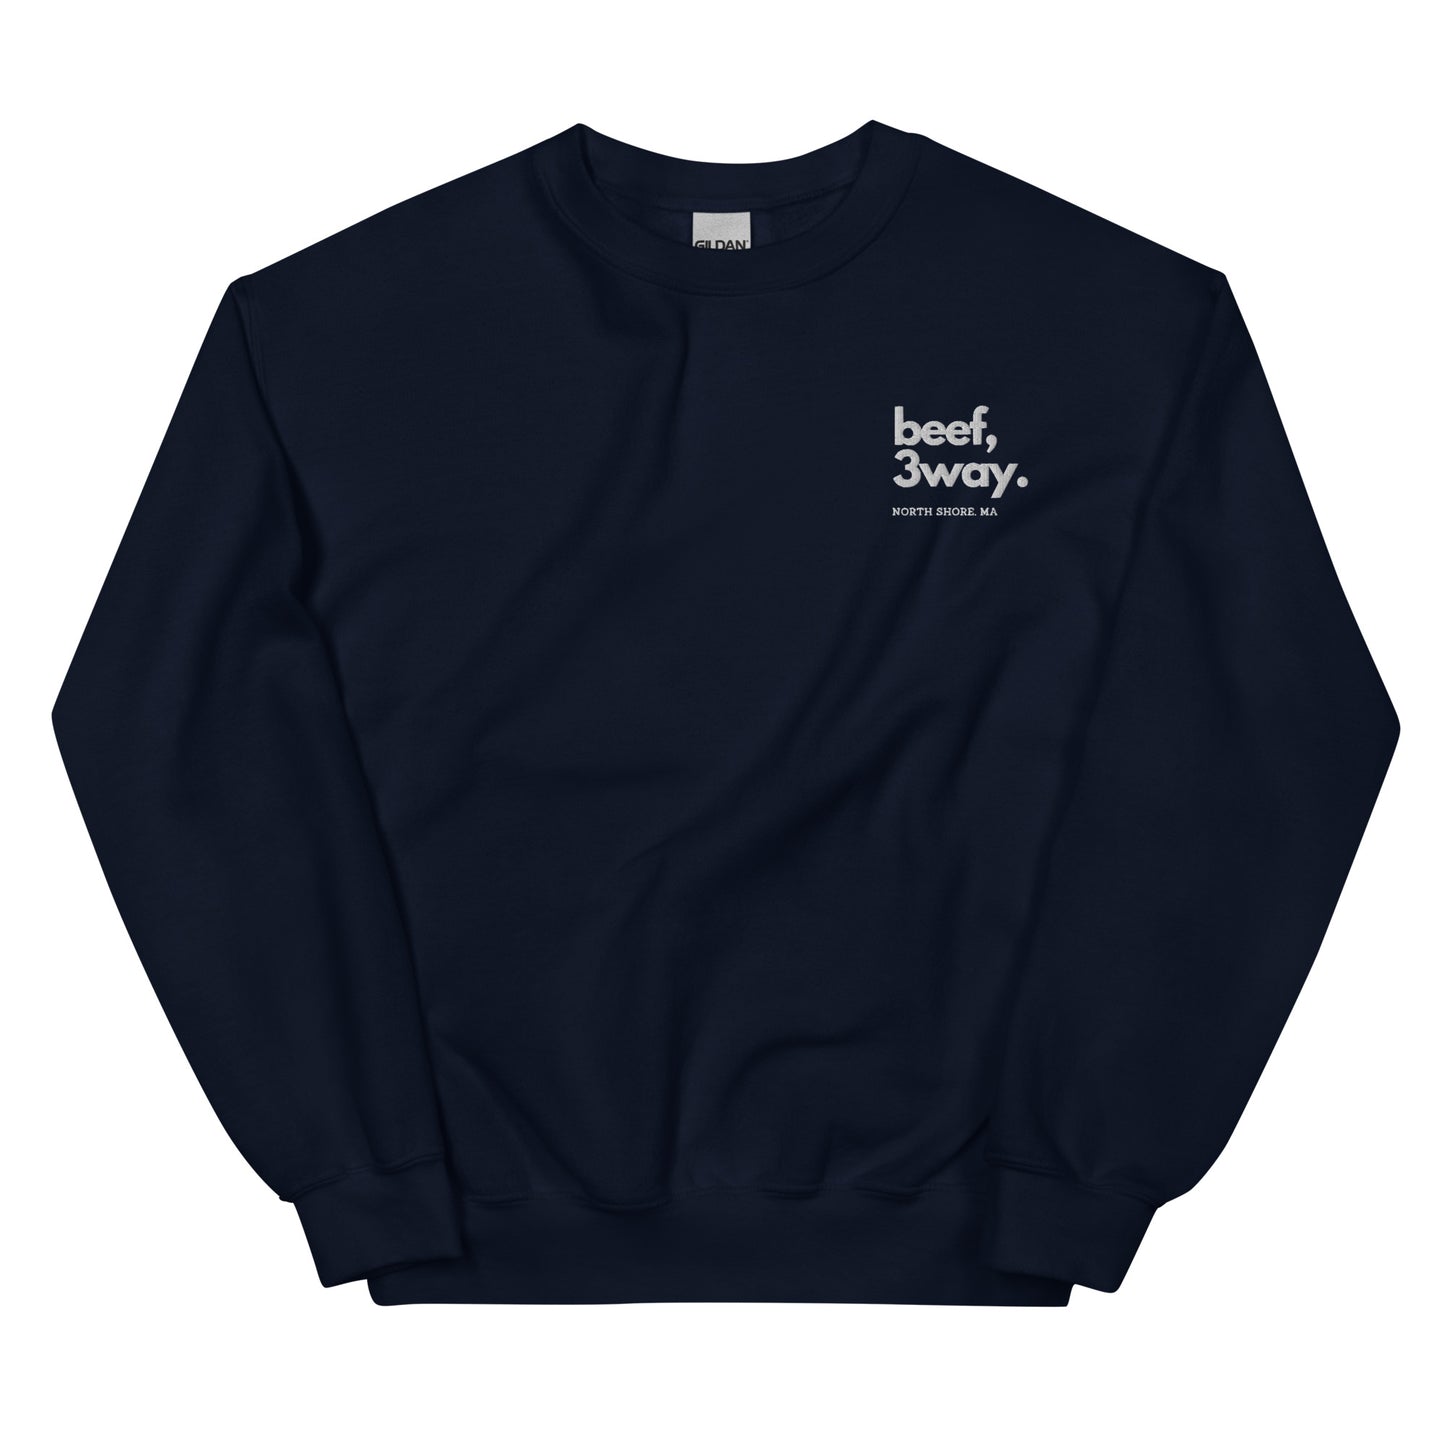 navy crewneck that says "beef, 3way north shore ma" in white lettering